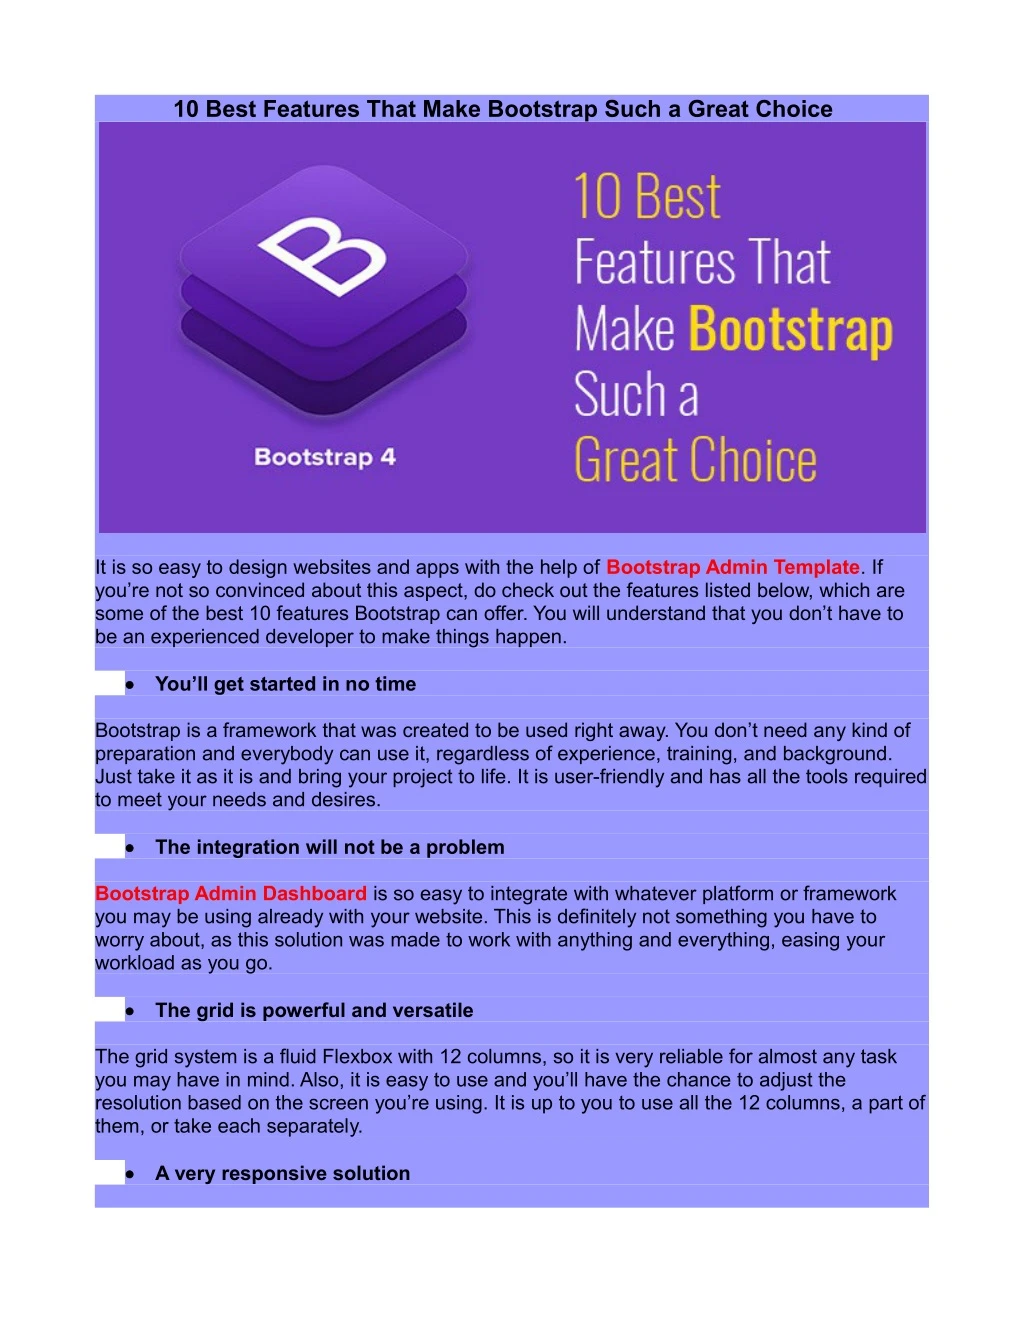 10 best features that make bootstrap such a great